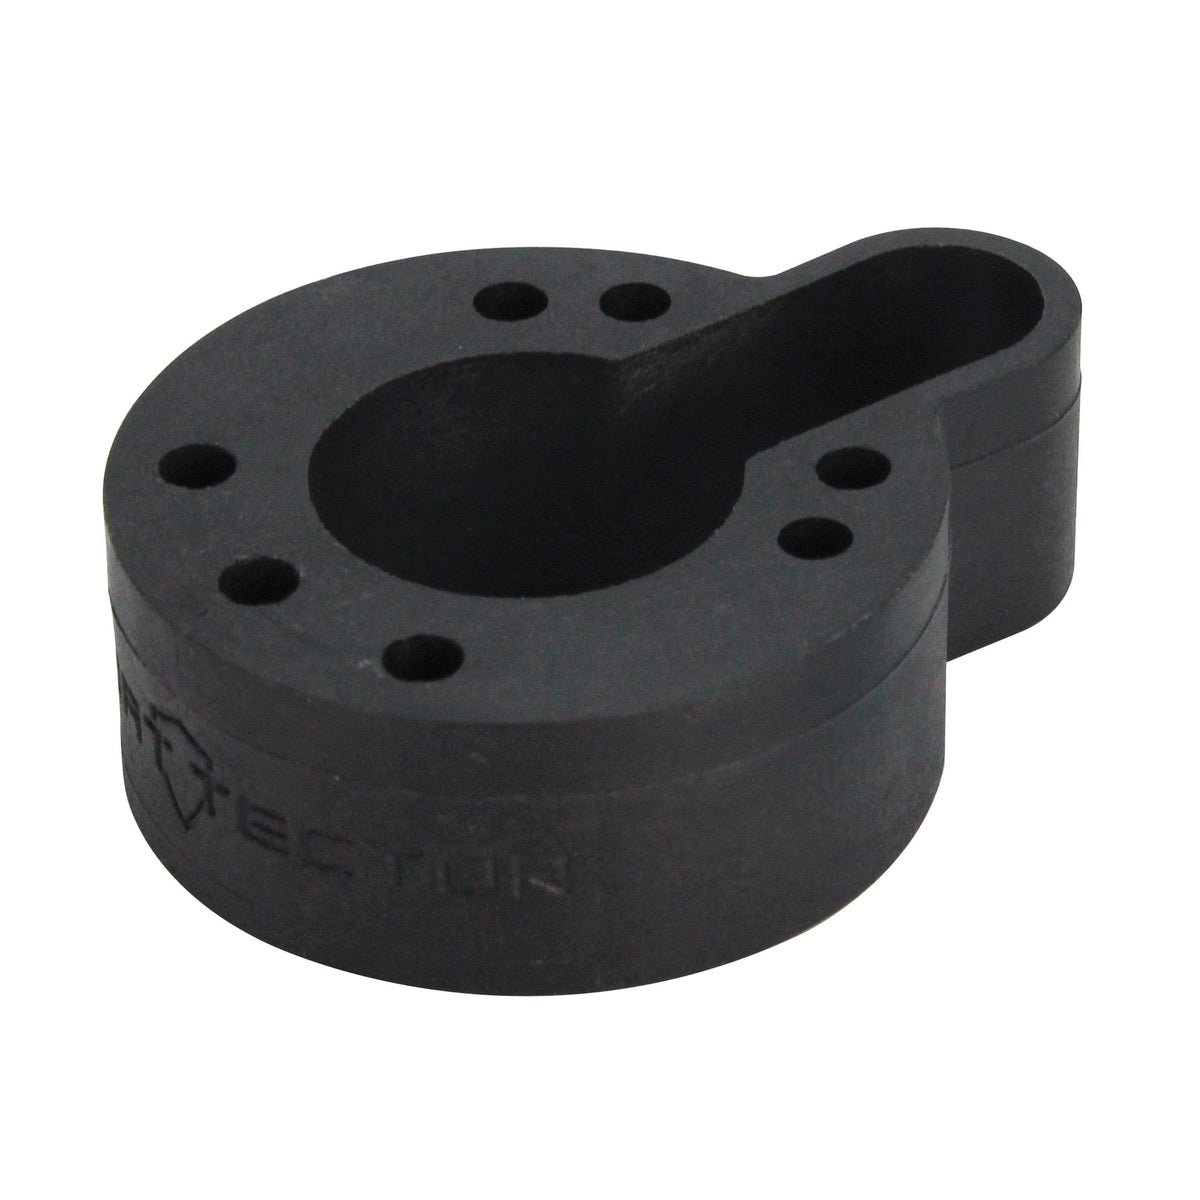 Extreme Max Qualifies for Free Shipping Extreme Max Clean Rig Spacer Small 2.5" Diameter #3002.4561